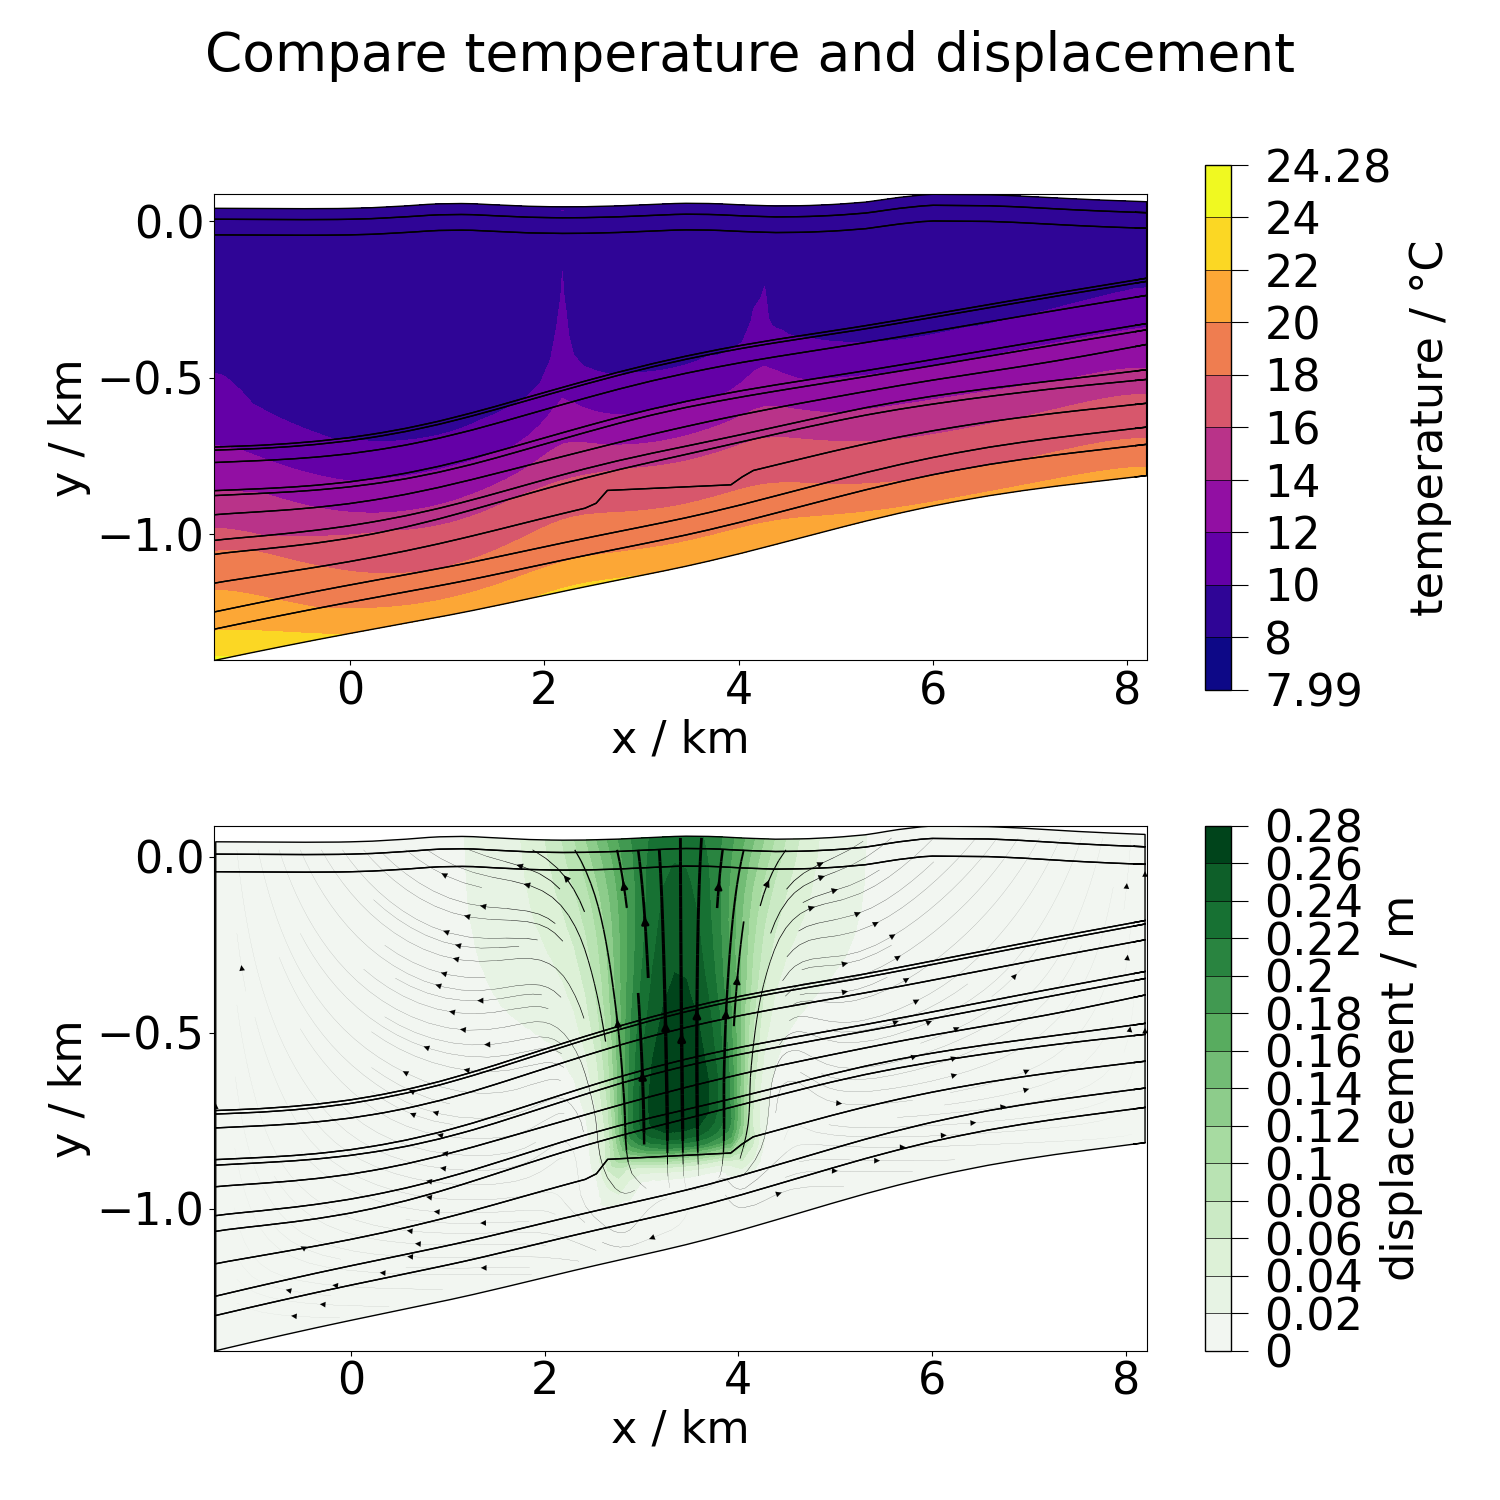 Compare temperature and displacement